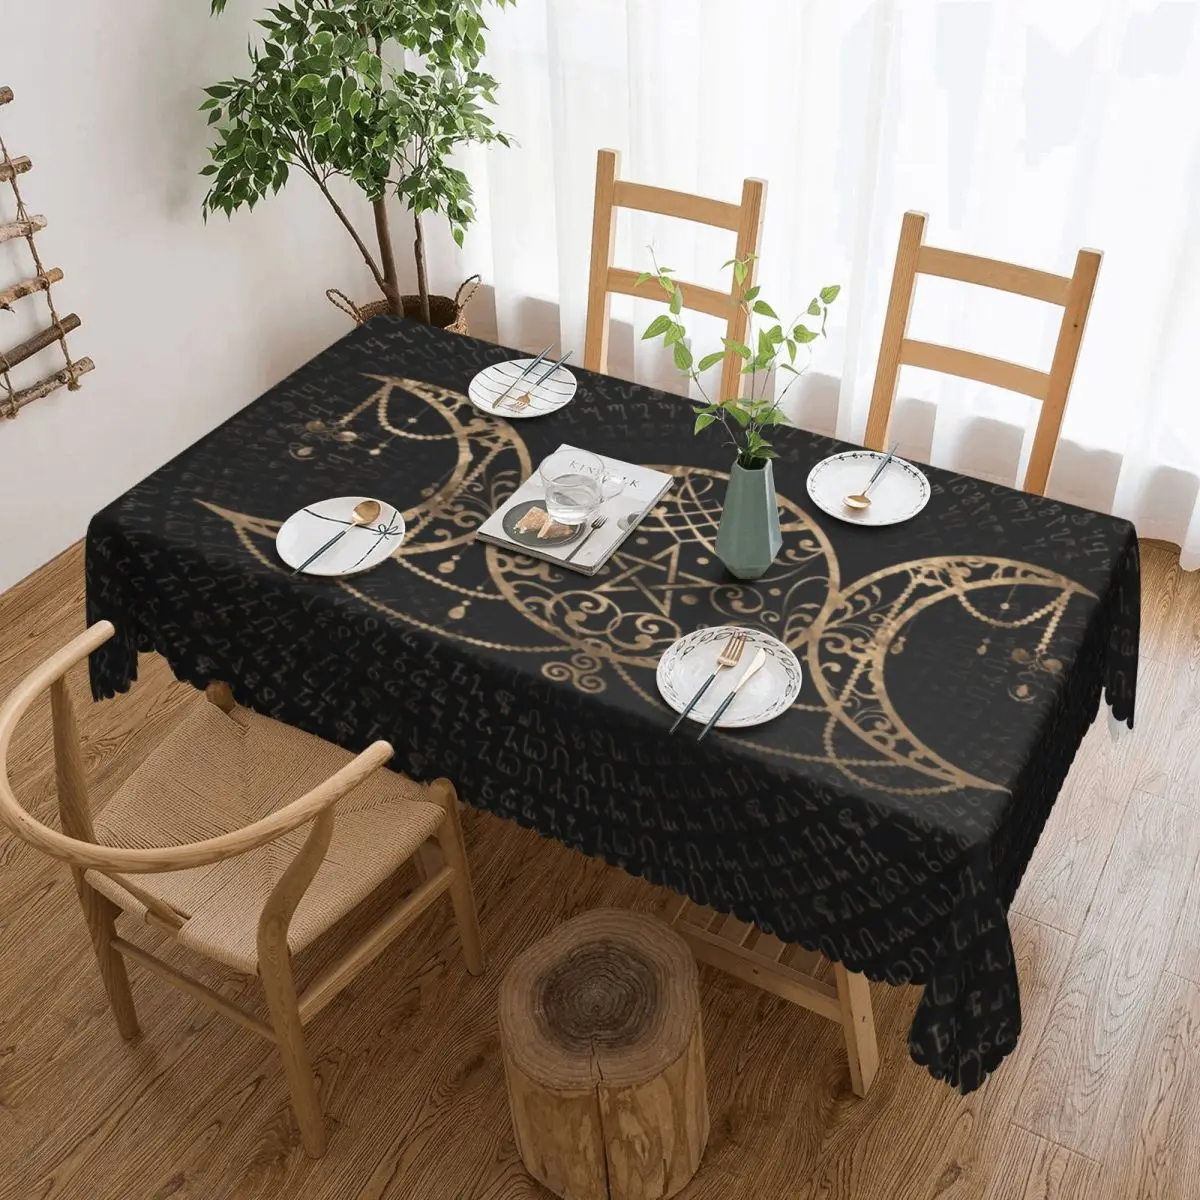 

Triple Moon Goddess Tablecloth Rectangular Oilproof Pentagram Pagan Wiccan Table Cloth Cover for Banquet